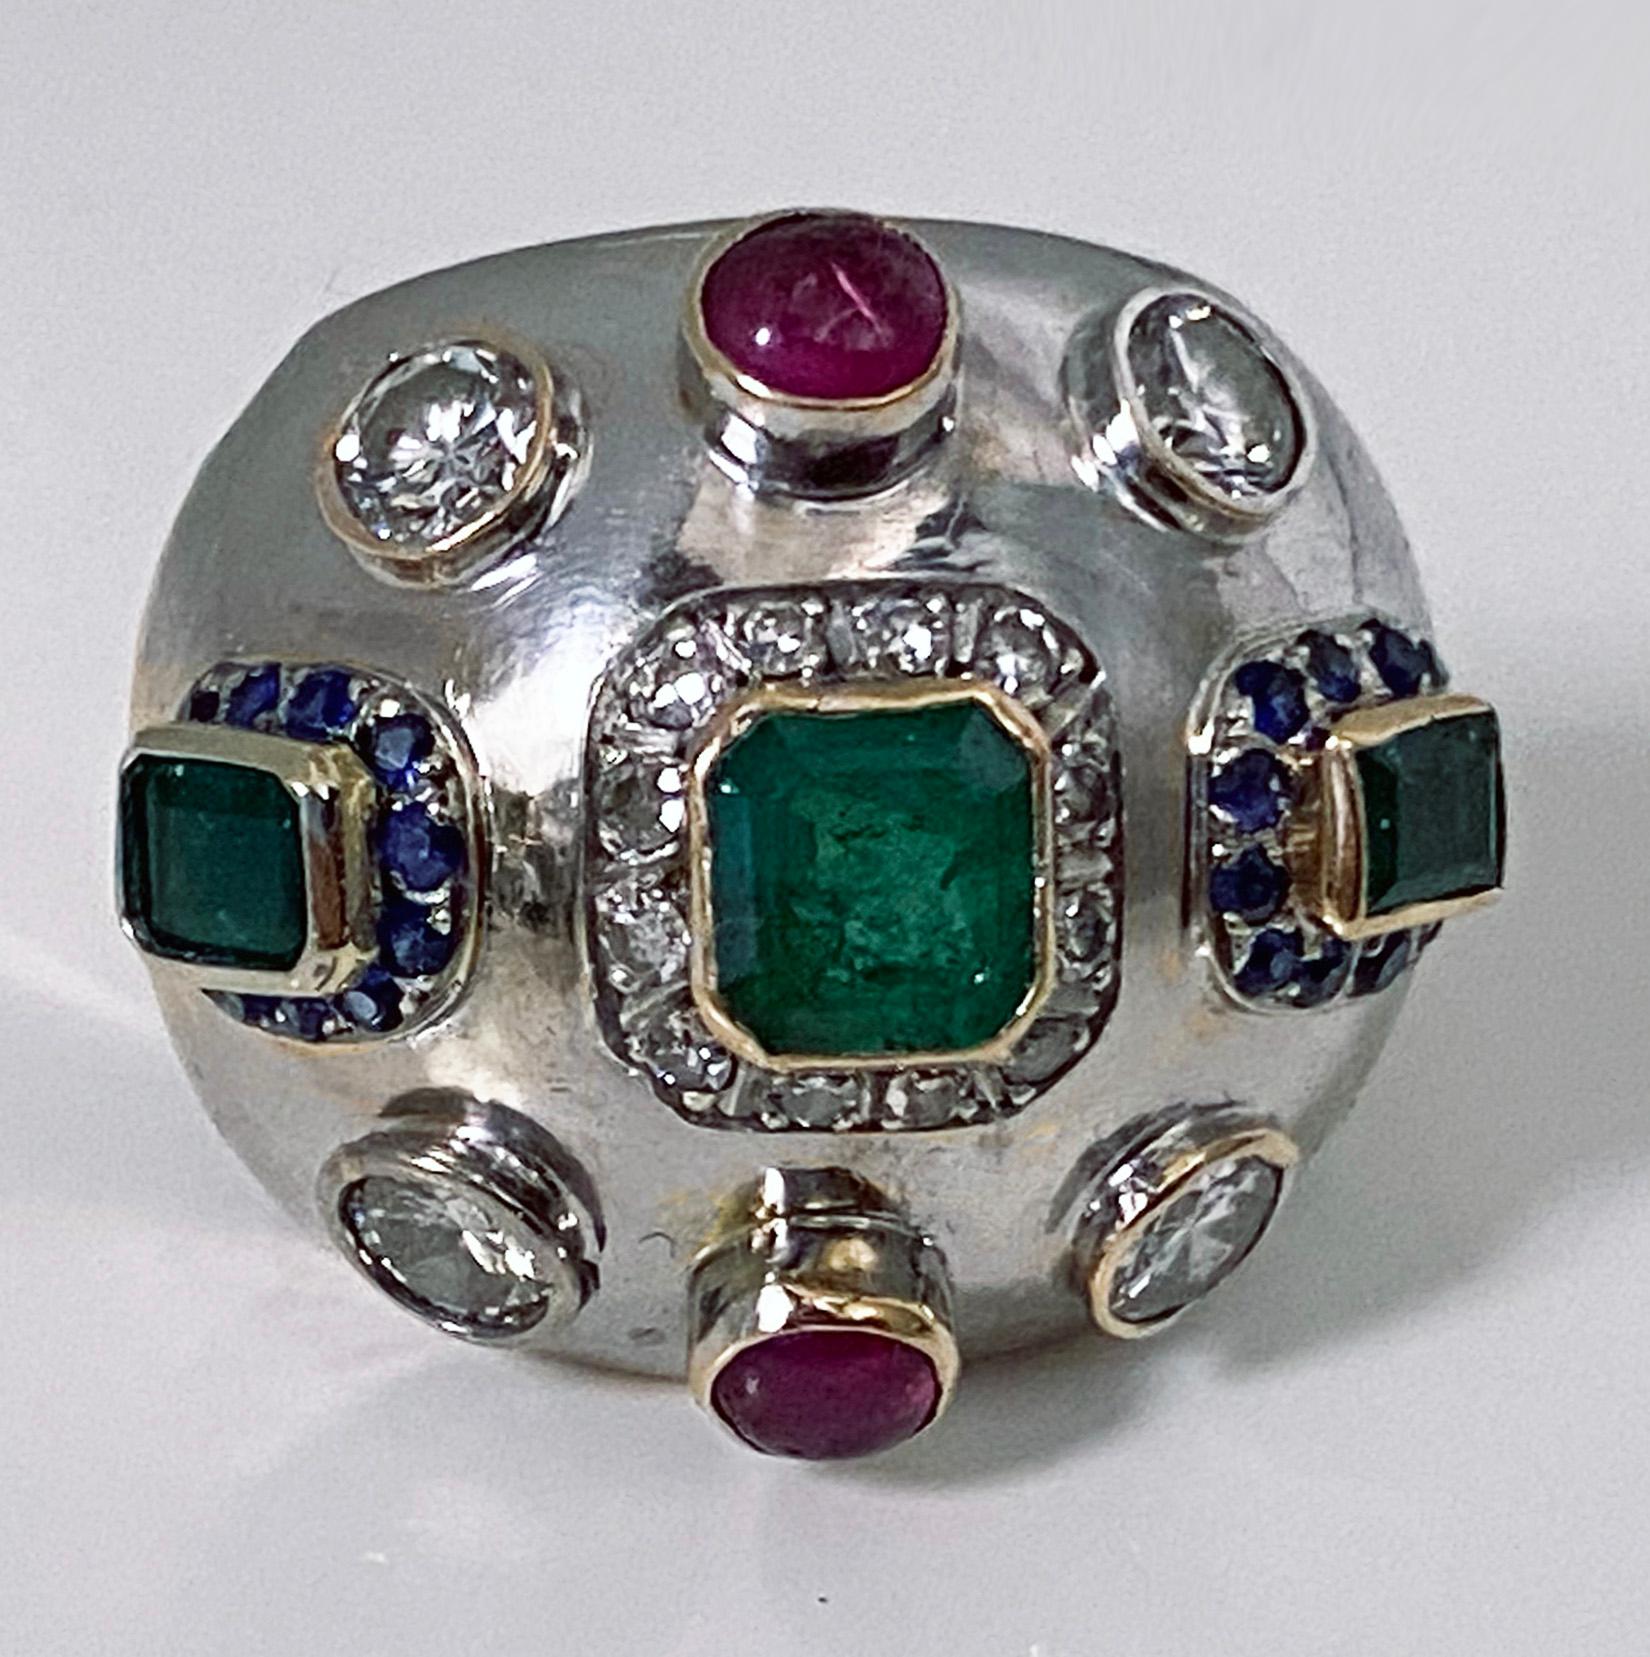 1960’s Sputnik gold diamond and gemstone ring. Set with three yellow green rectangular set emeralds, approximately 3.00 ct, total weight, average SI1 (type 111) clarity, four round brilliant cut diamonds, approximately 1.00 ct, total diamond weight,